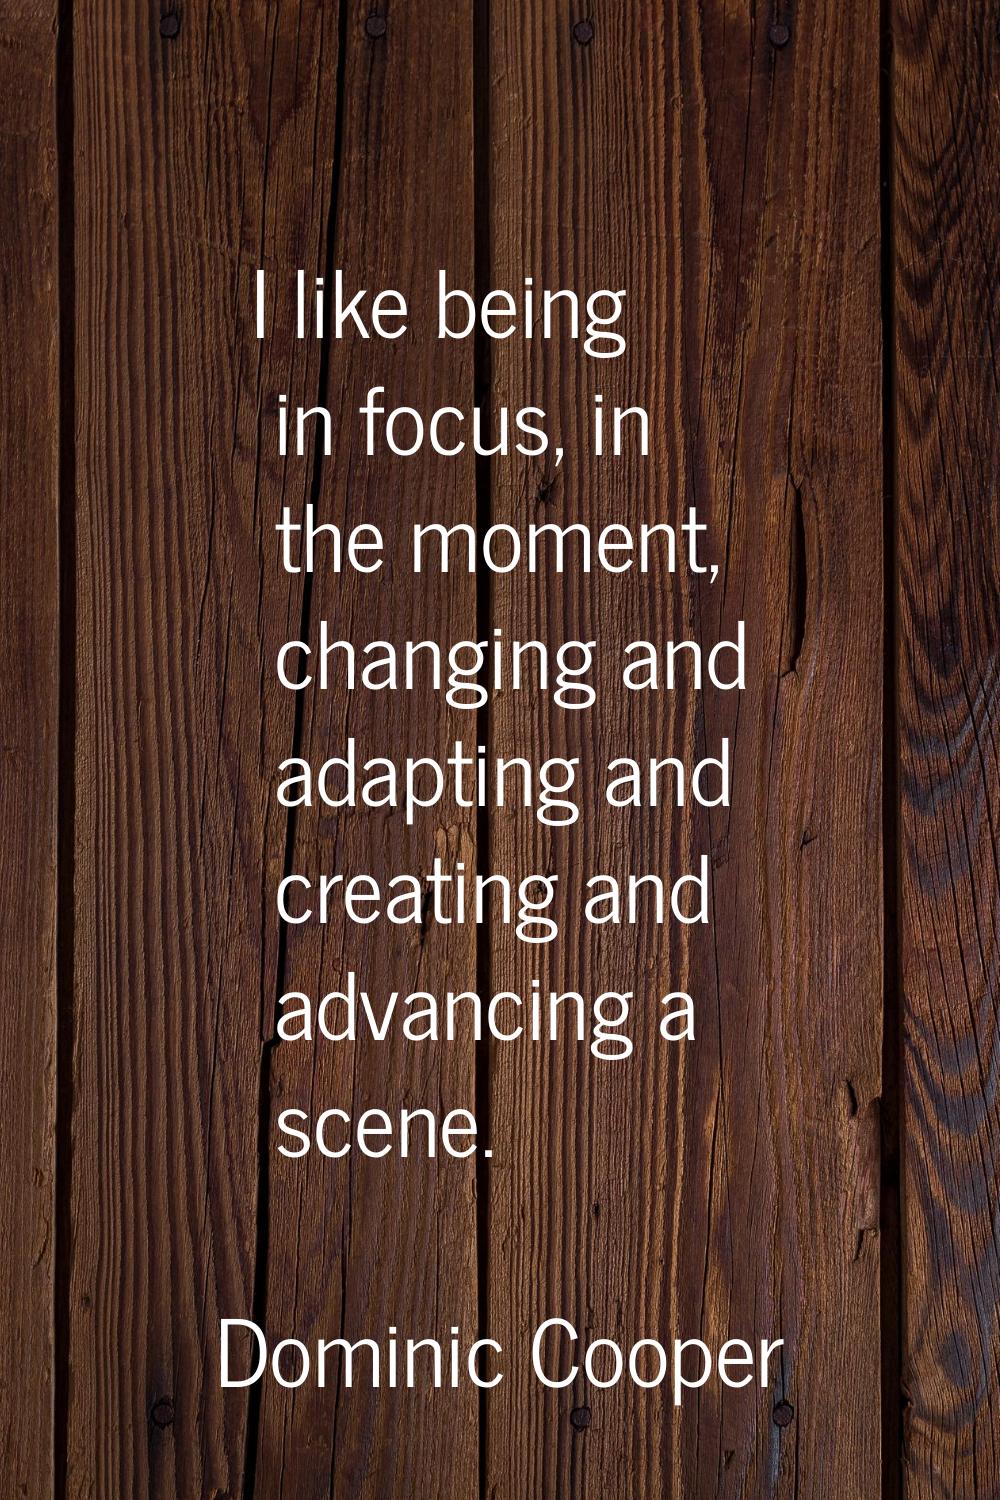 I like being in focus, in the moment, changing and adapting and creating and advancing a scene.